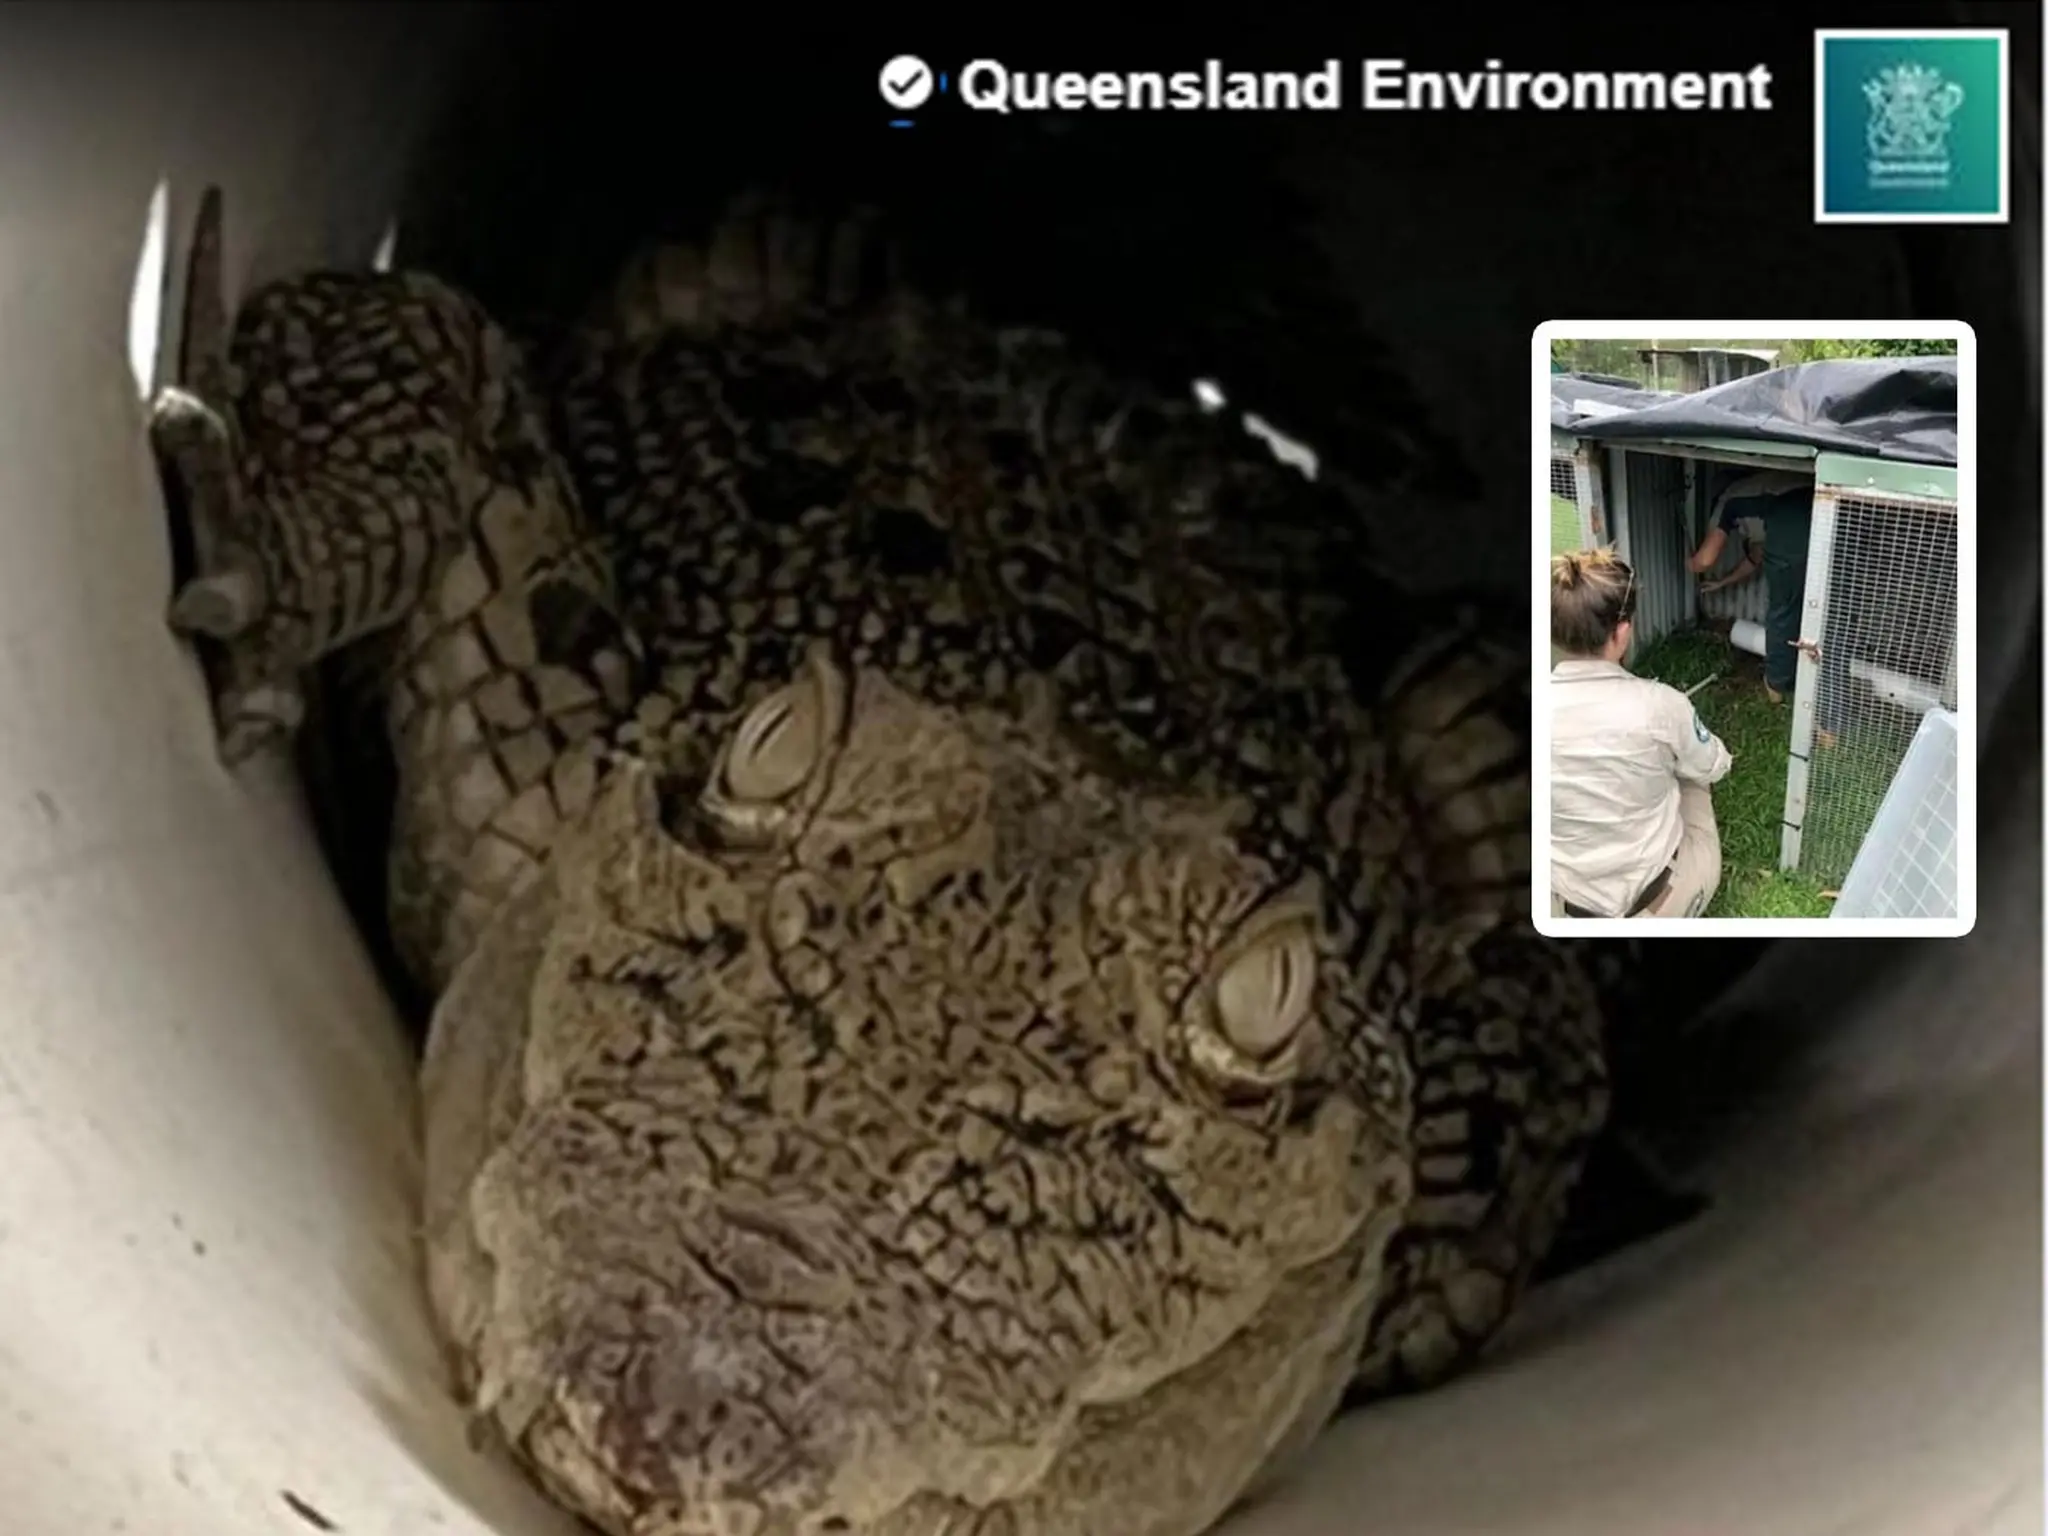 Shock and horror in Australia after a 3-foot crocodile was discovered inside a house